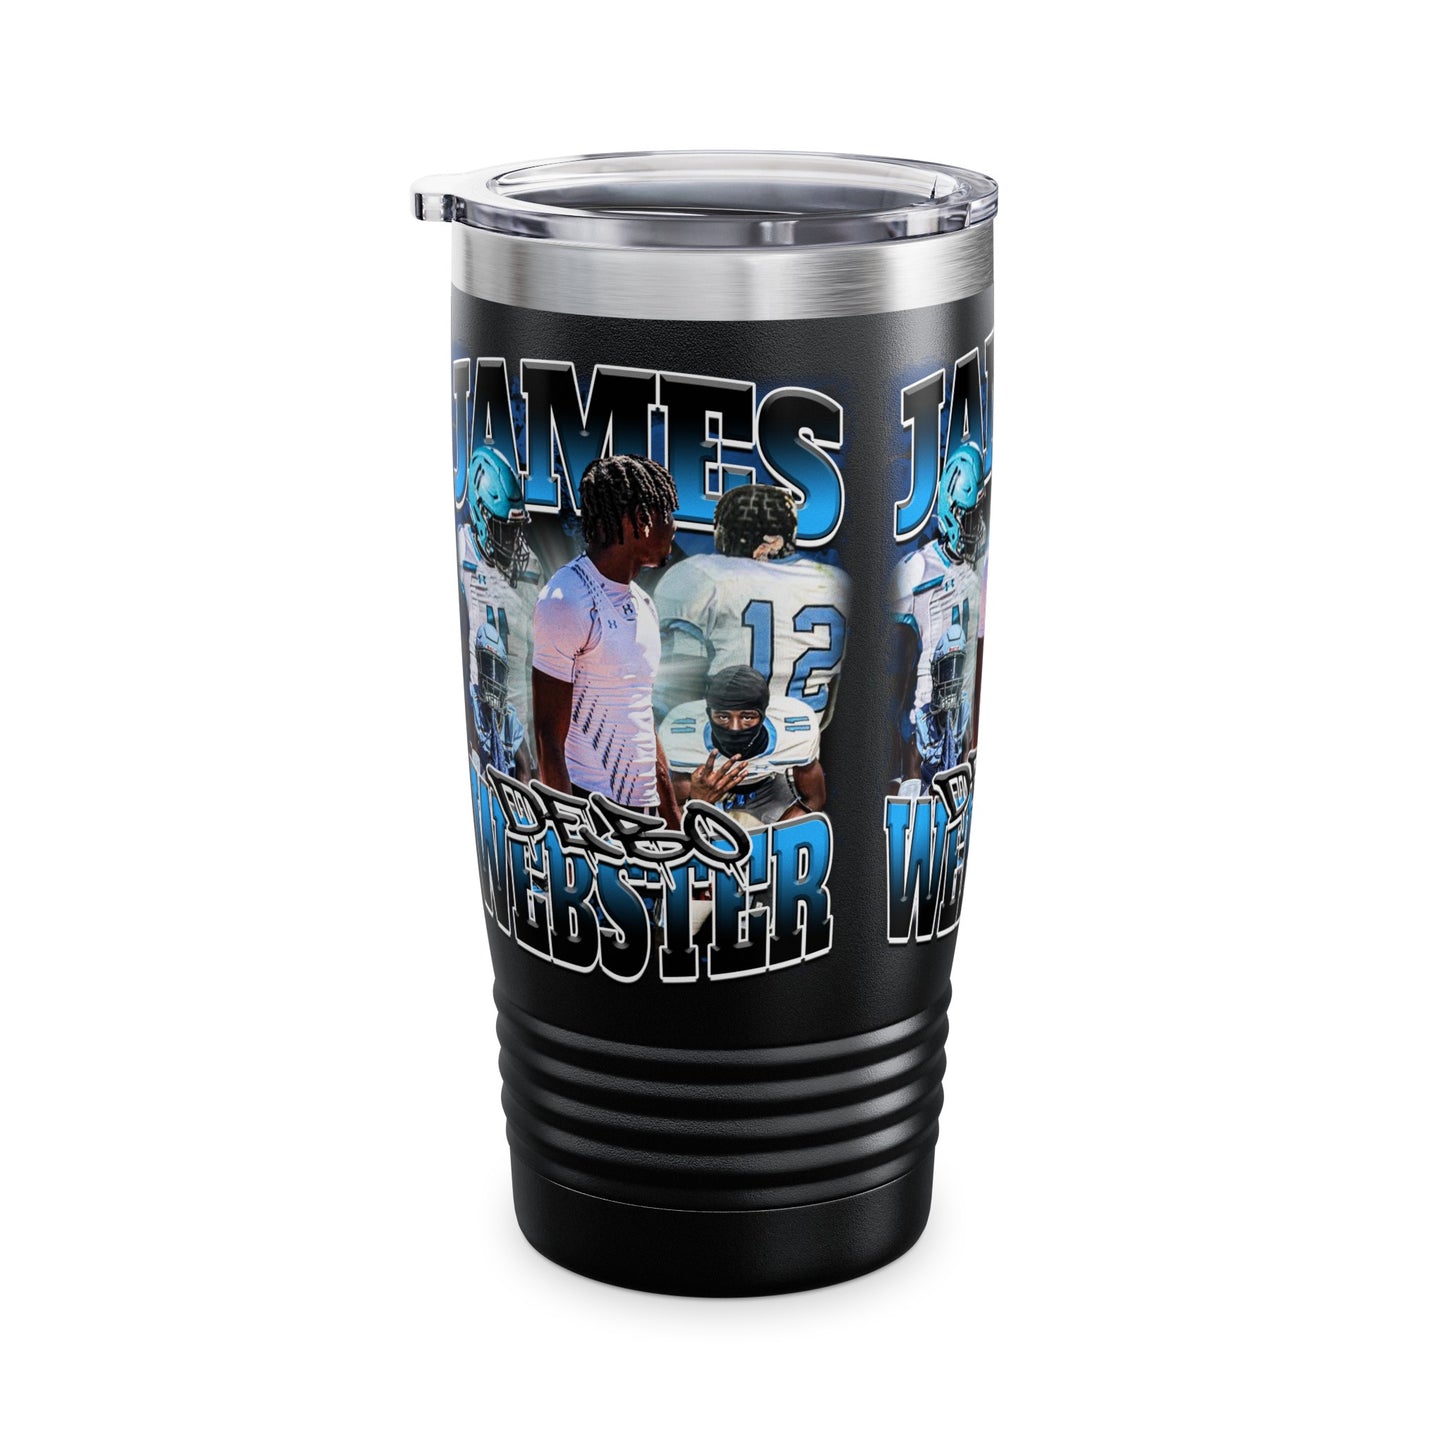 James Webster Stainless Steal Tumbler